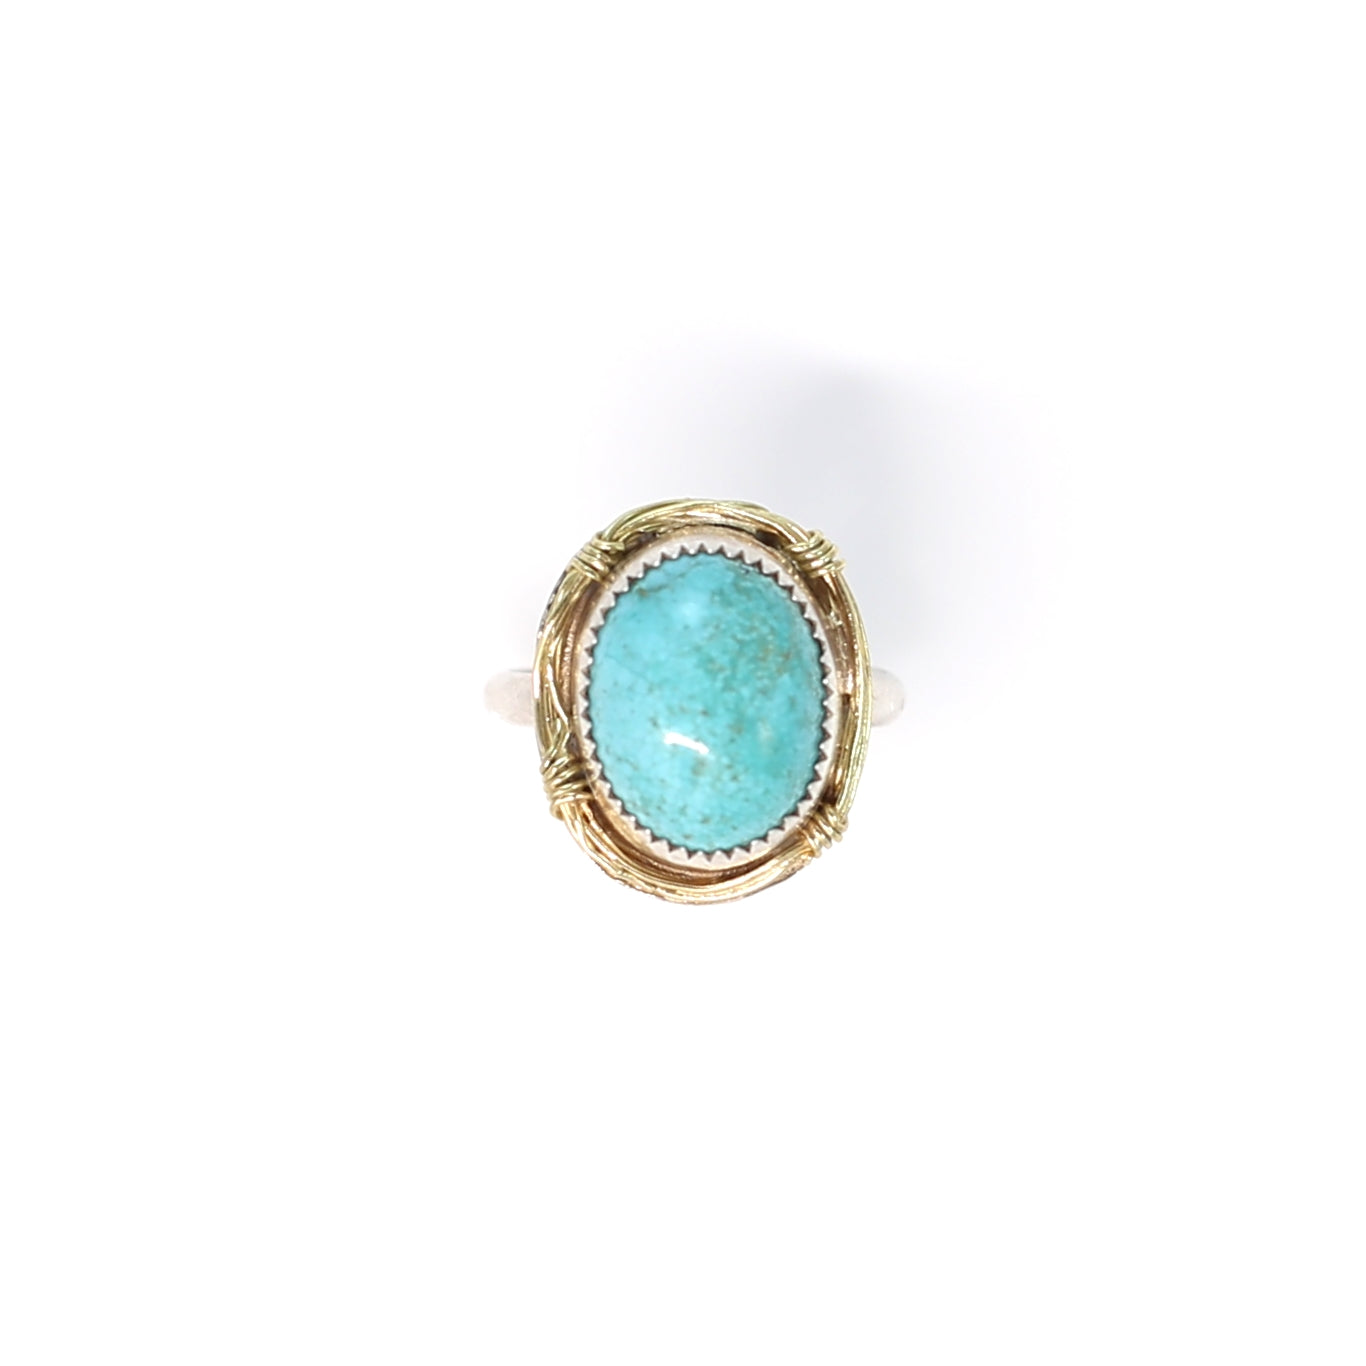 Turquoise "Bird's Nest" Handmade Ring in 18k Gold and Sterling Silver with Smooth Band